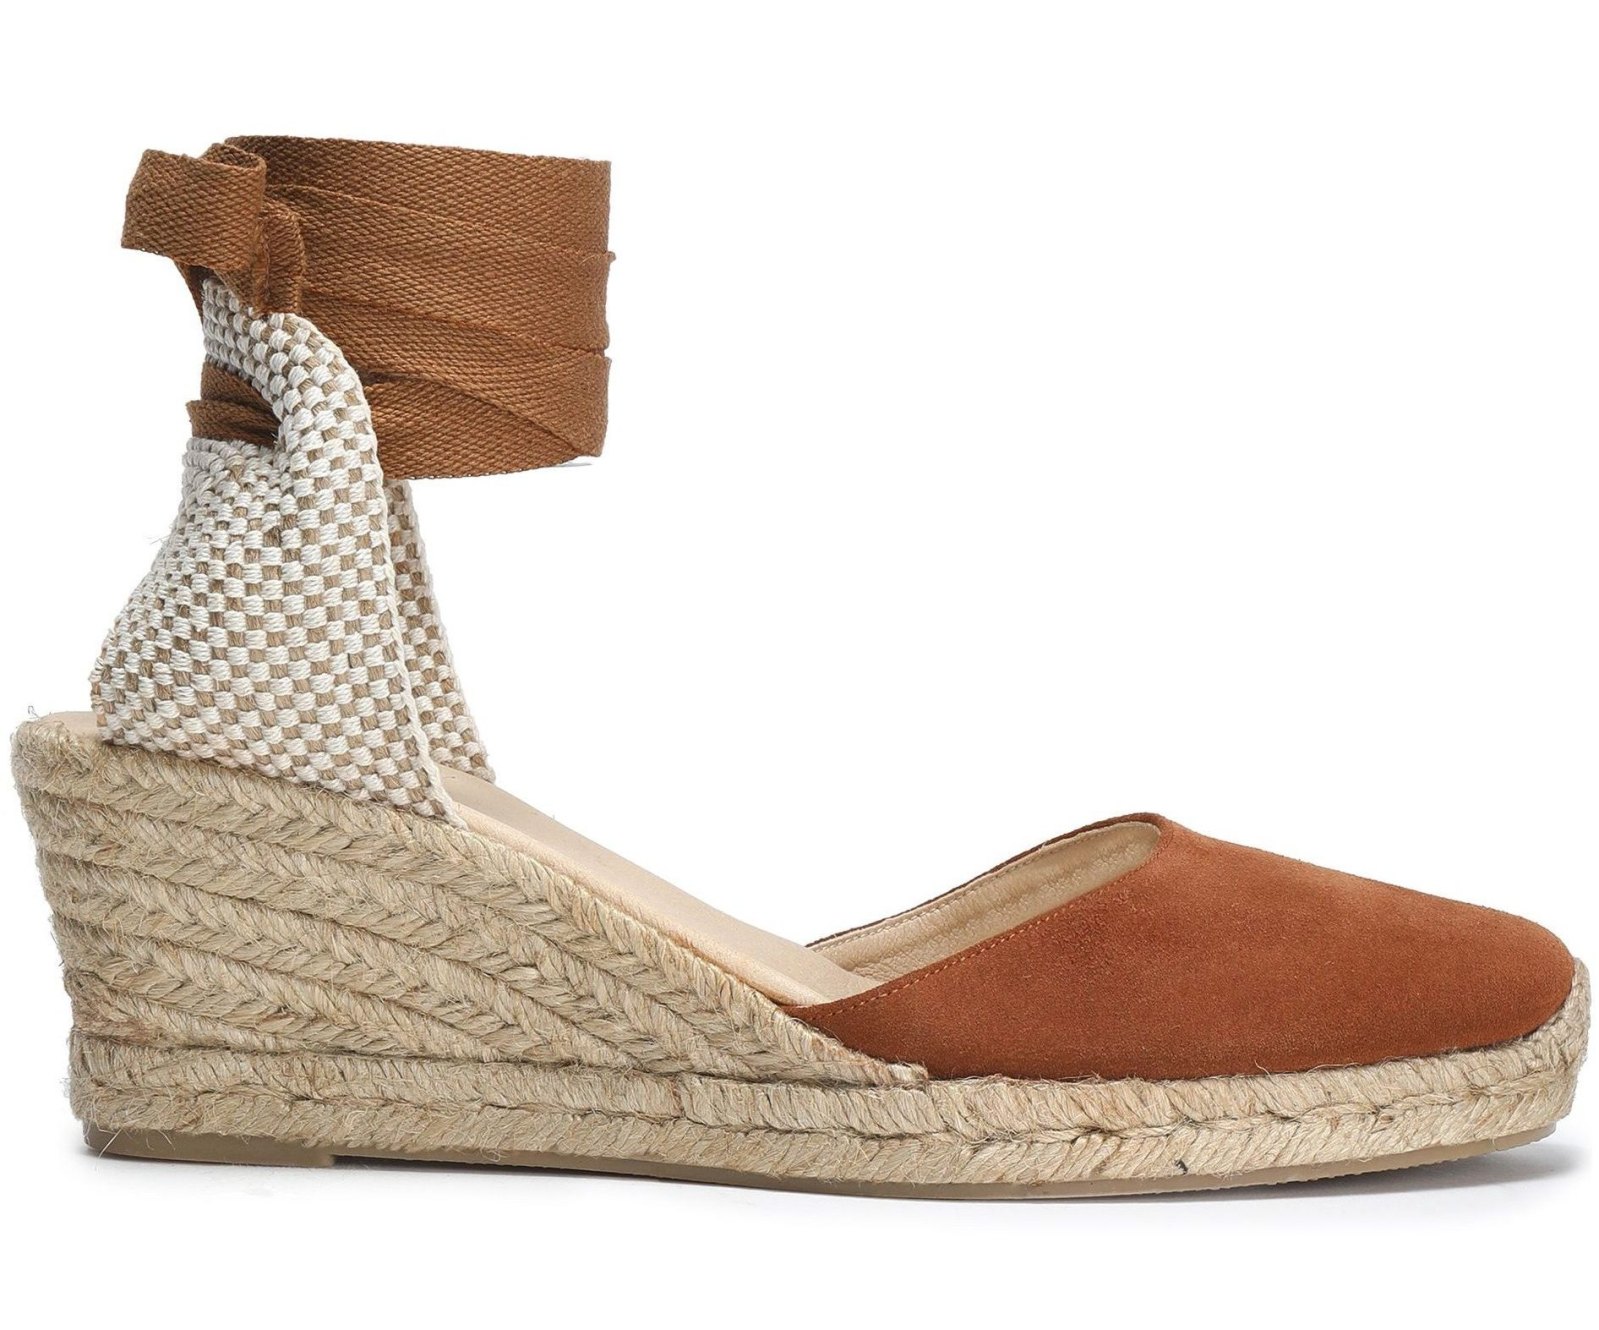 Shop Pippa Middleton and Michelle Obama-Inspired Espadrille Wedges | Us ...